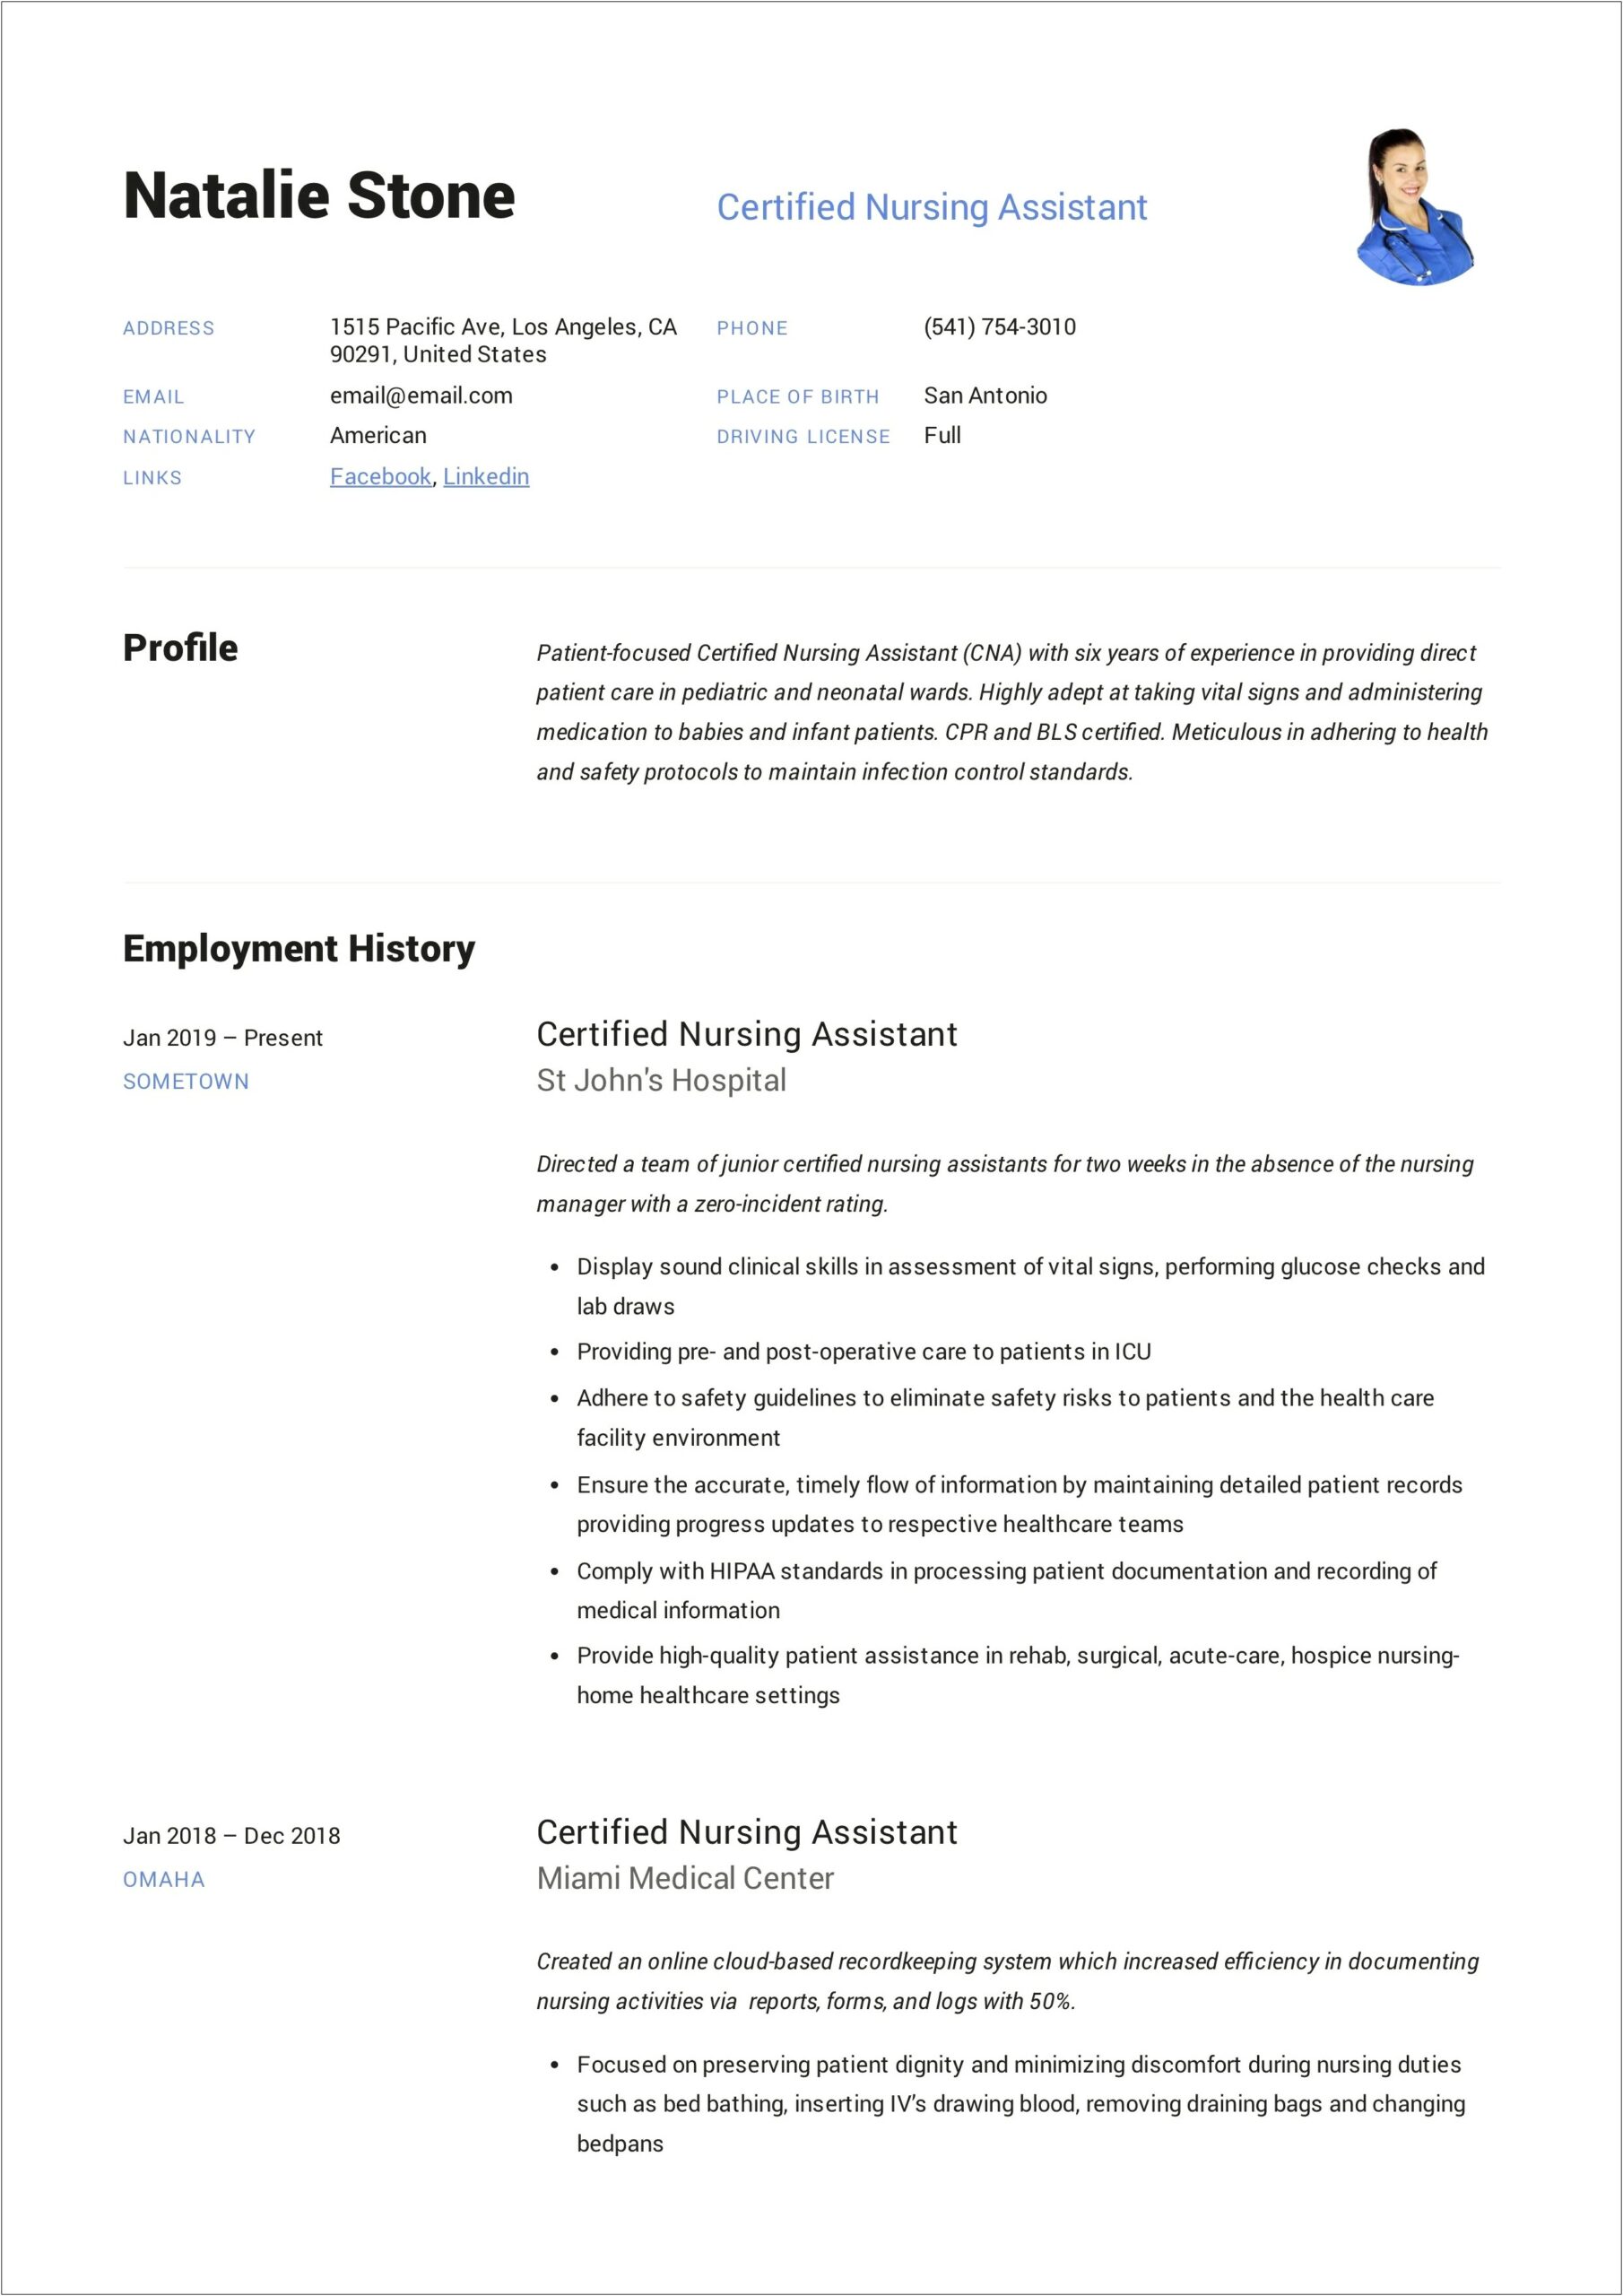 Samples Of Cna Resumes With License Number